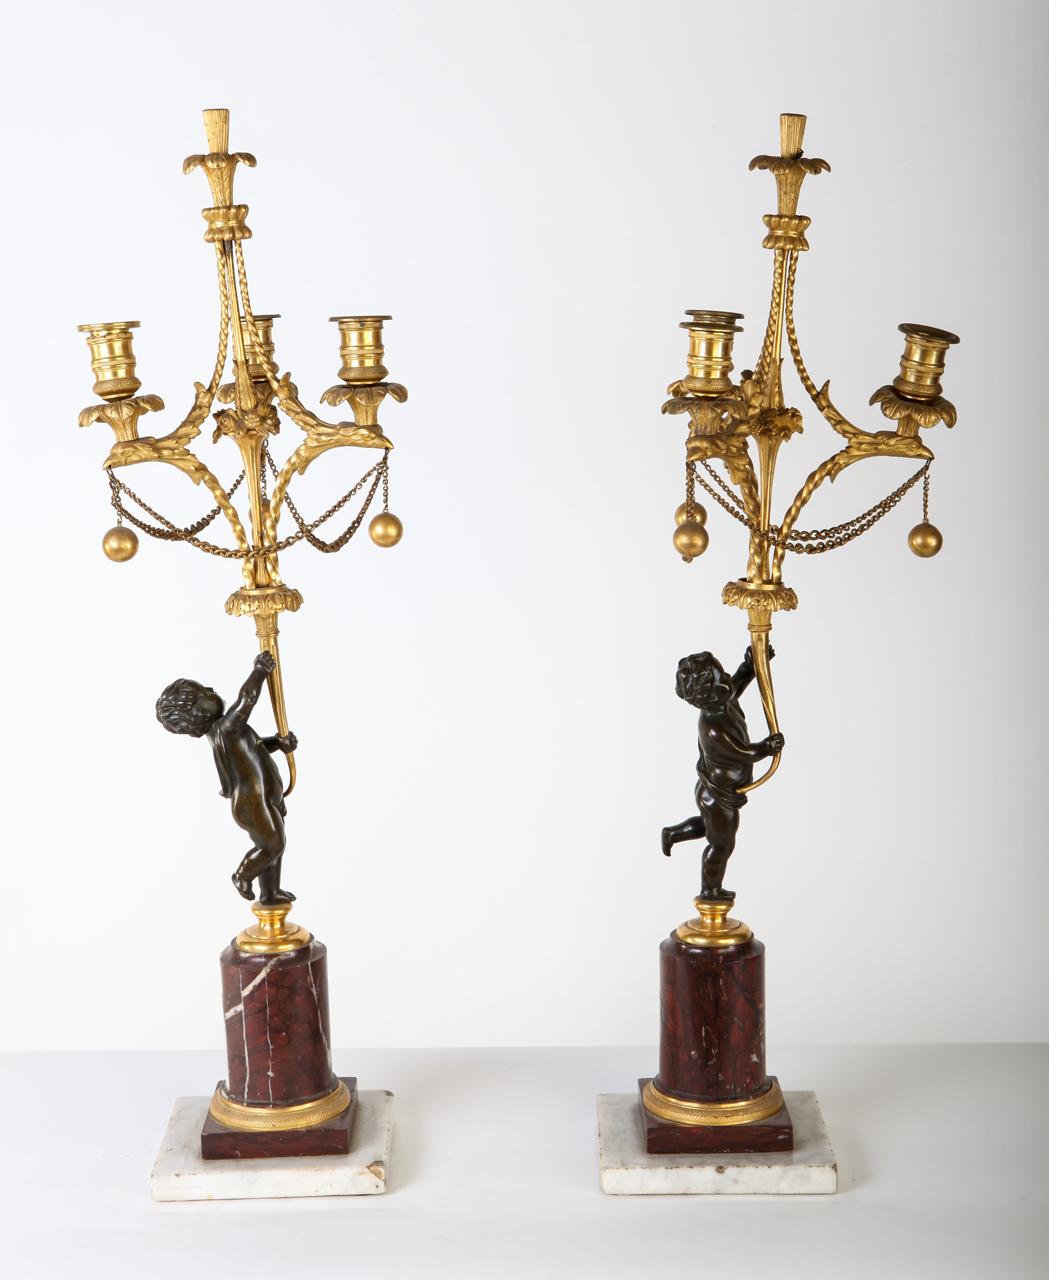 Fine Pair of French 18th Century Bronze and Gilt Bronze Candelabra For Sale 2